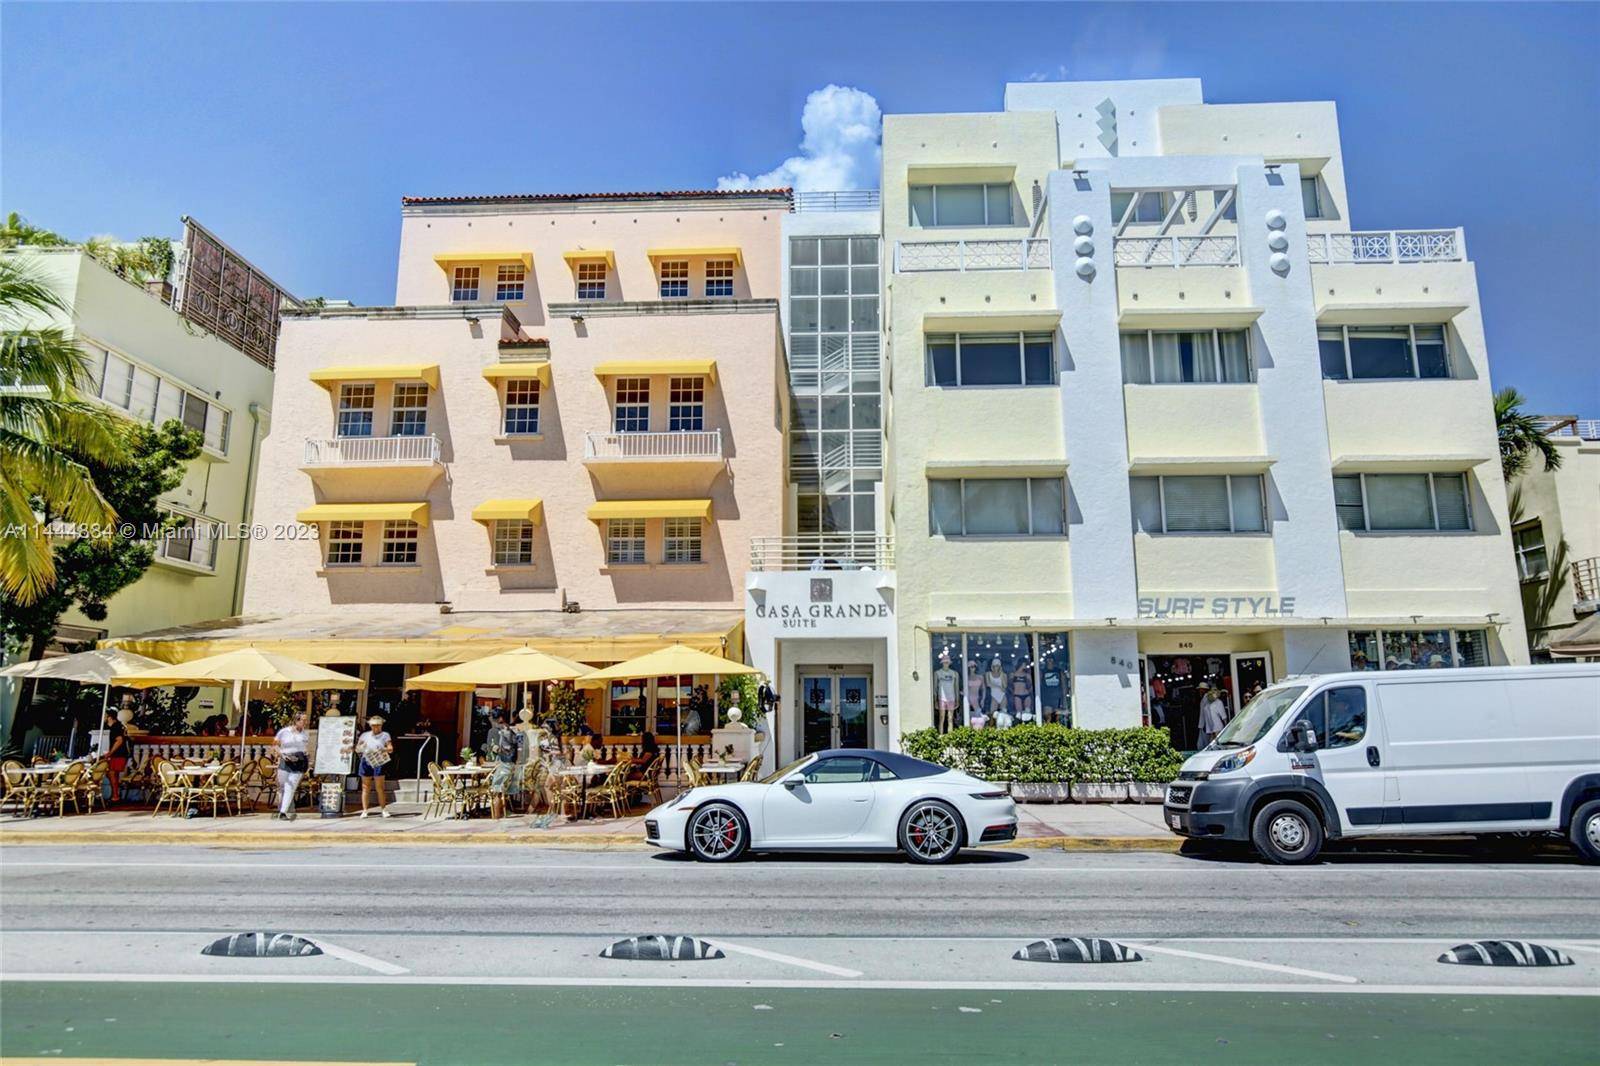 High income producing licensed short term daily rental in CASA GRANDE condo hotel directly on world famous Ocean Drive.